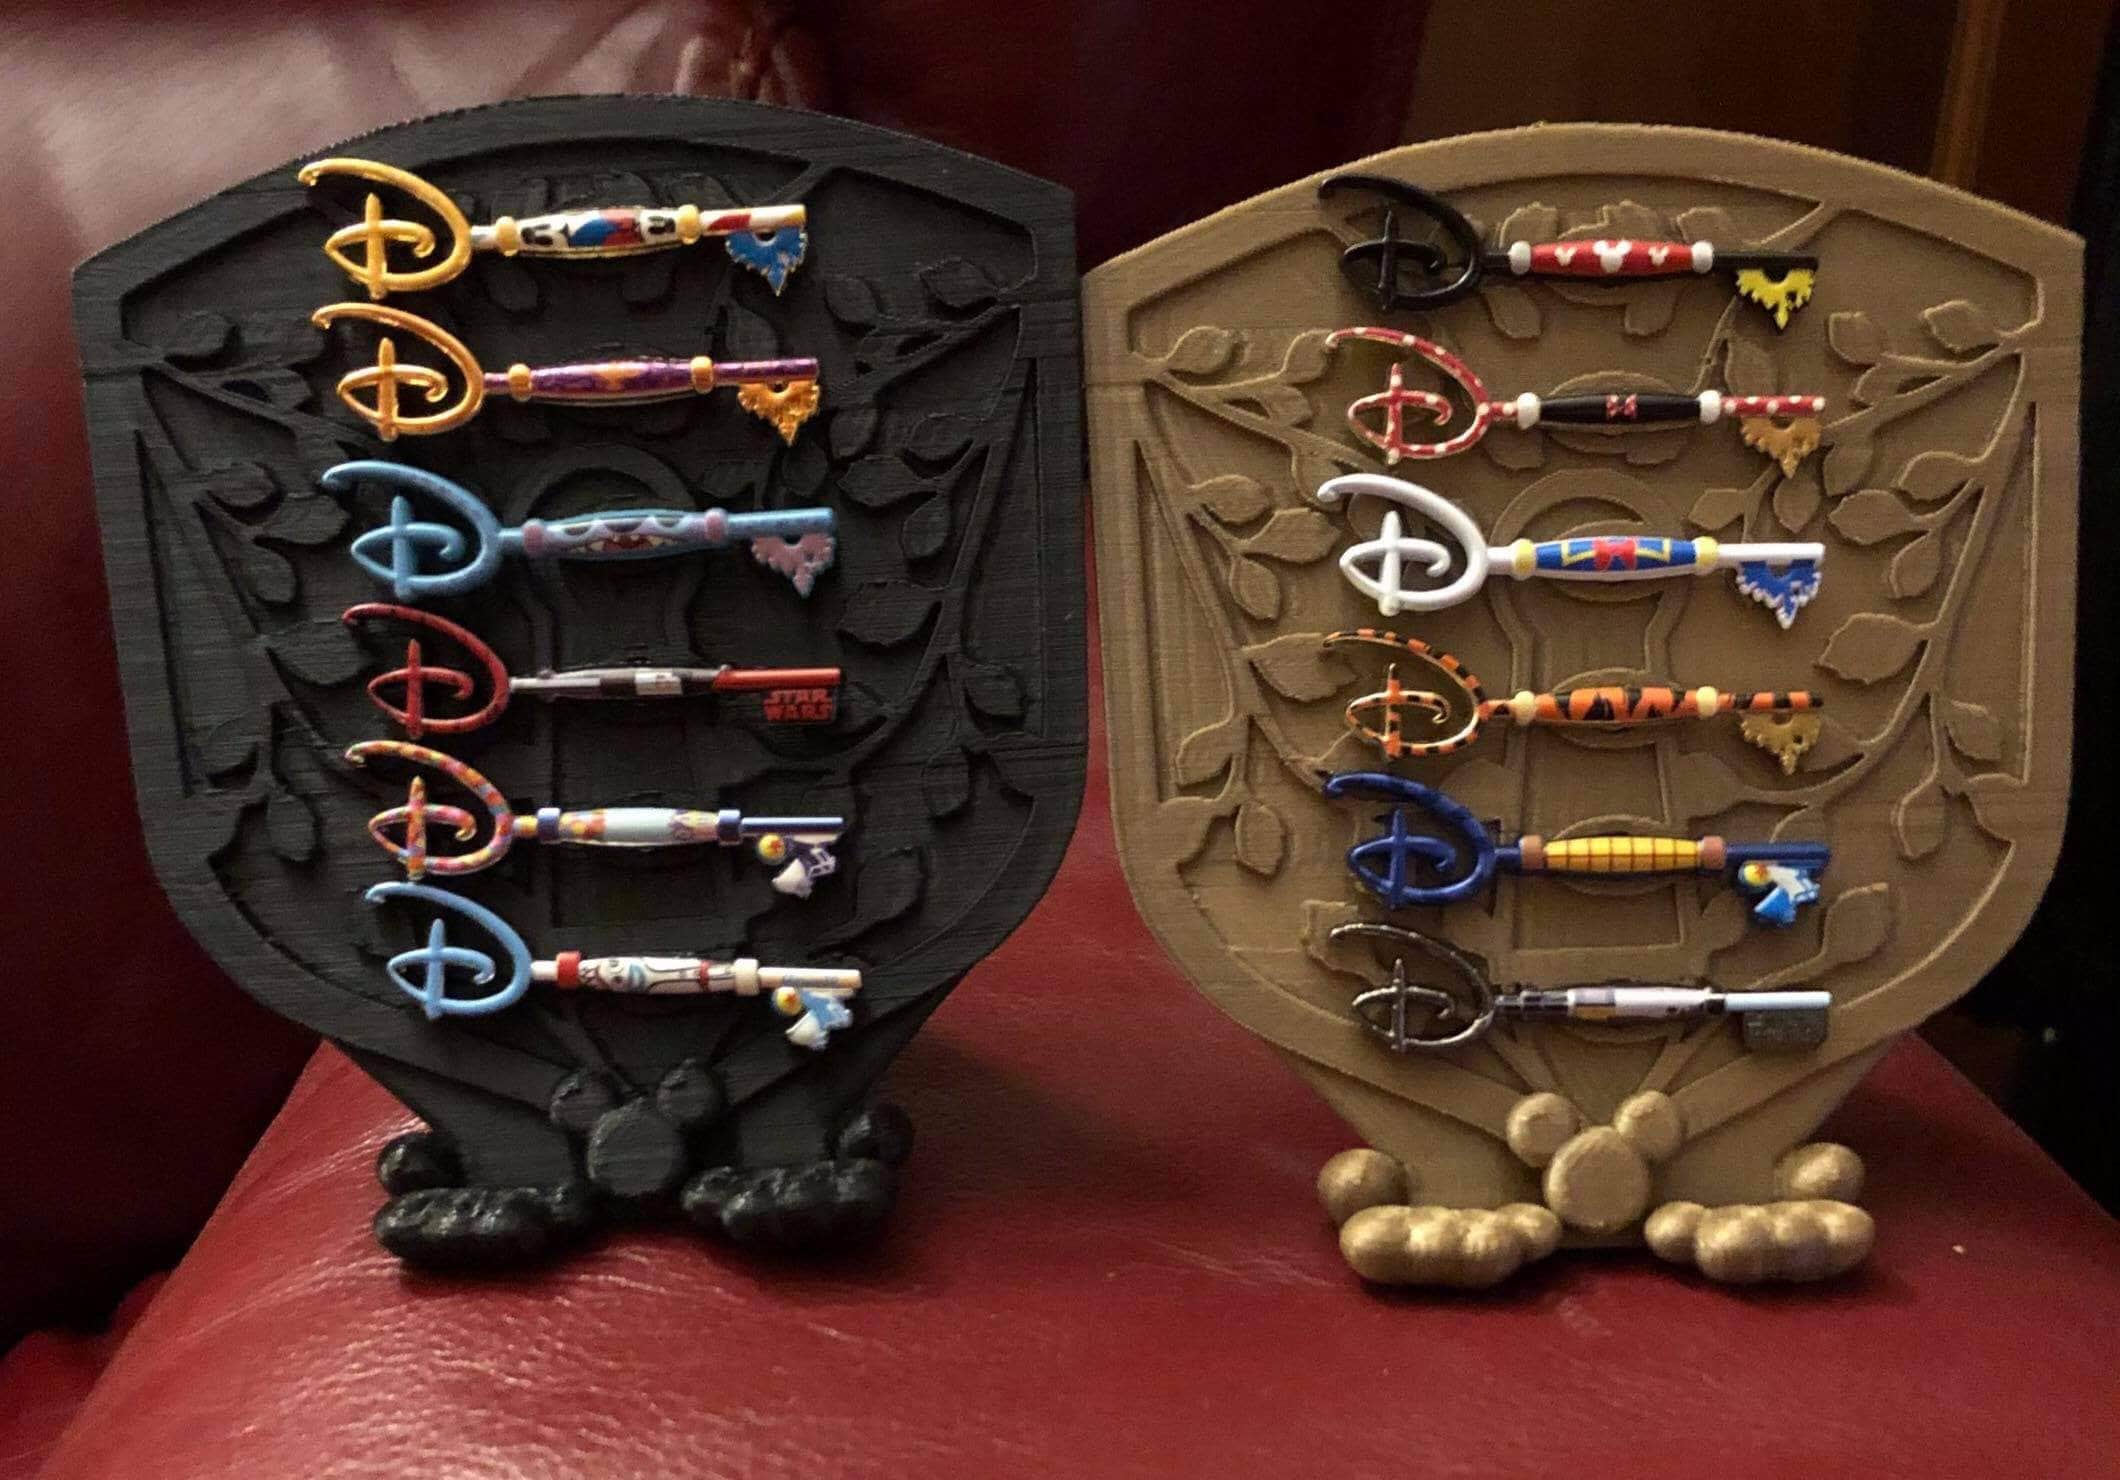 SCS Direct Enamel Pin Display Pages (6 PK) - Display and Trade Your Disney Collectible Pins in Any 3-Ring Binder - Pages Lay Flat with Pinbacks and No Sagging!